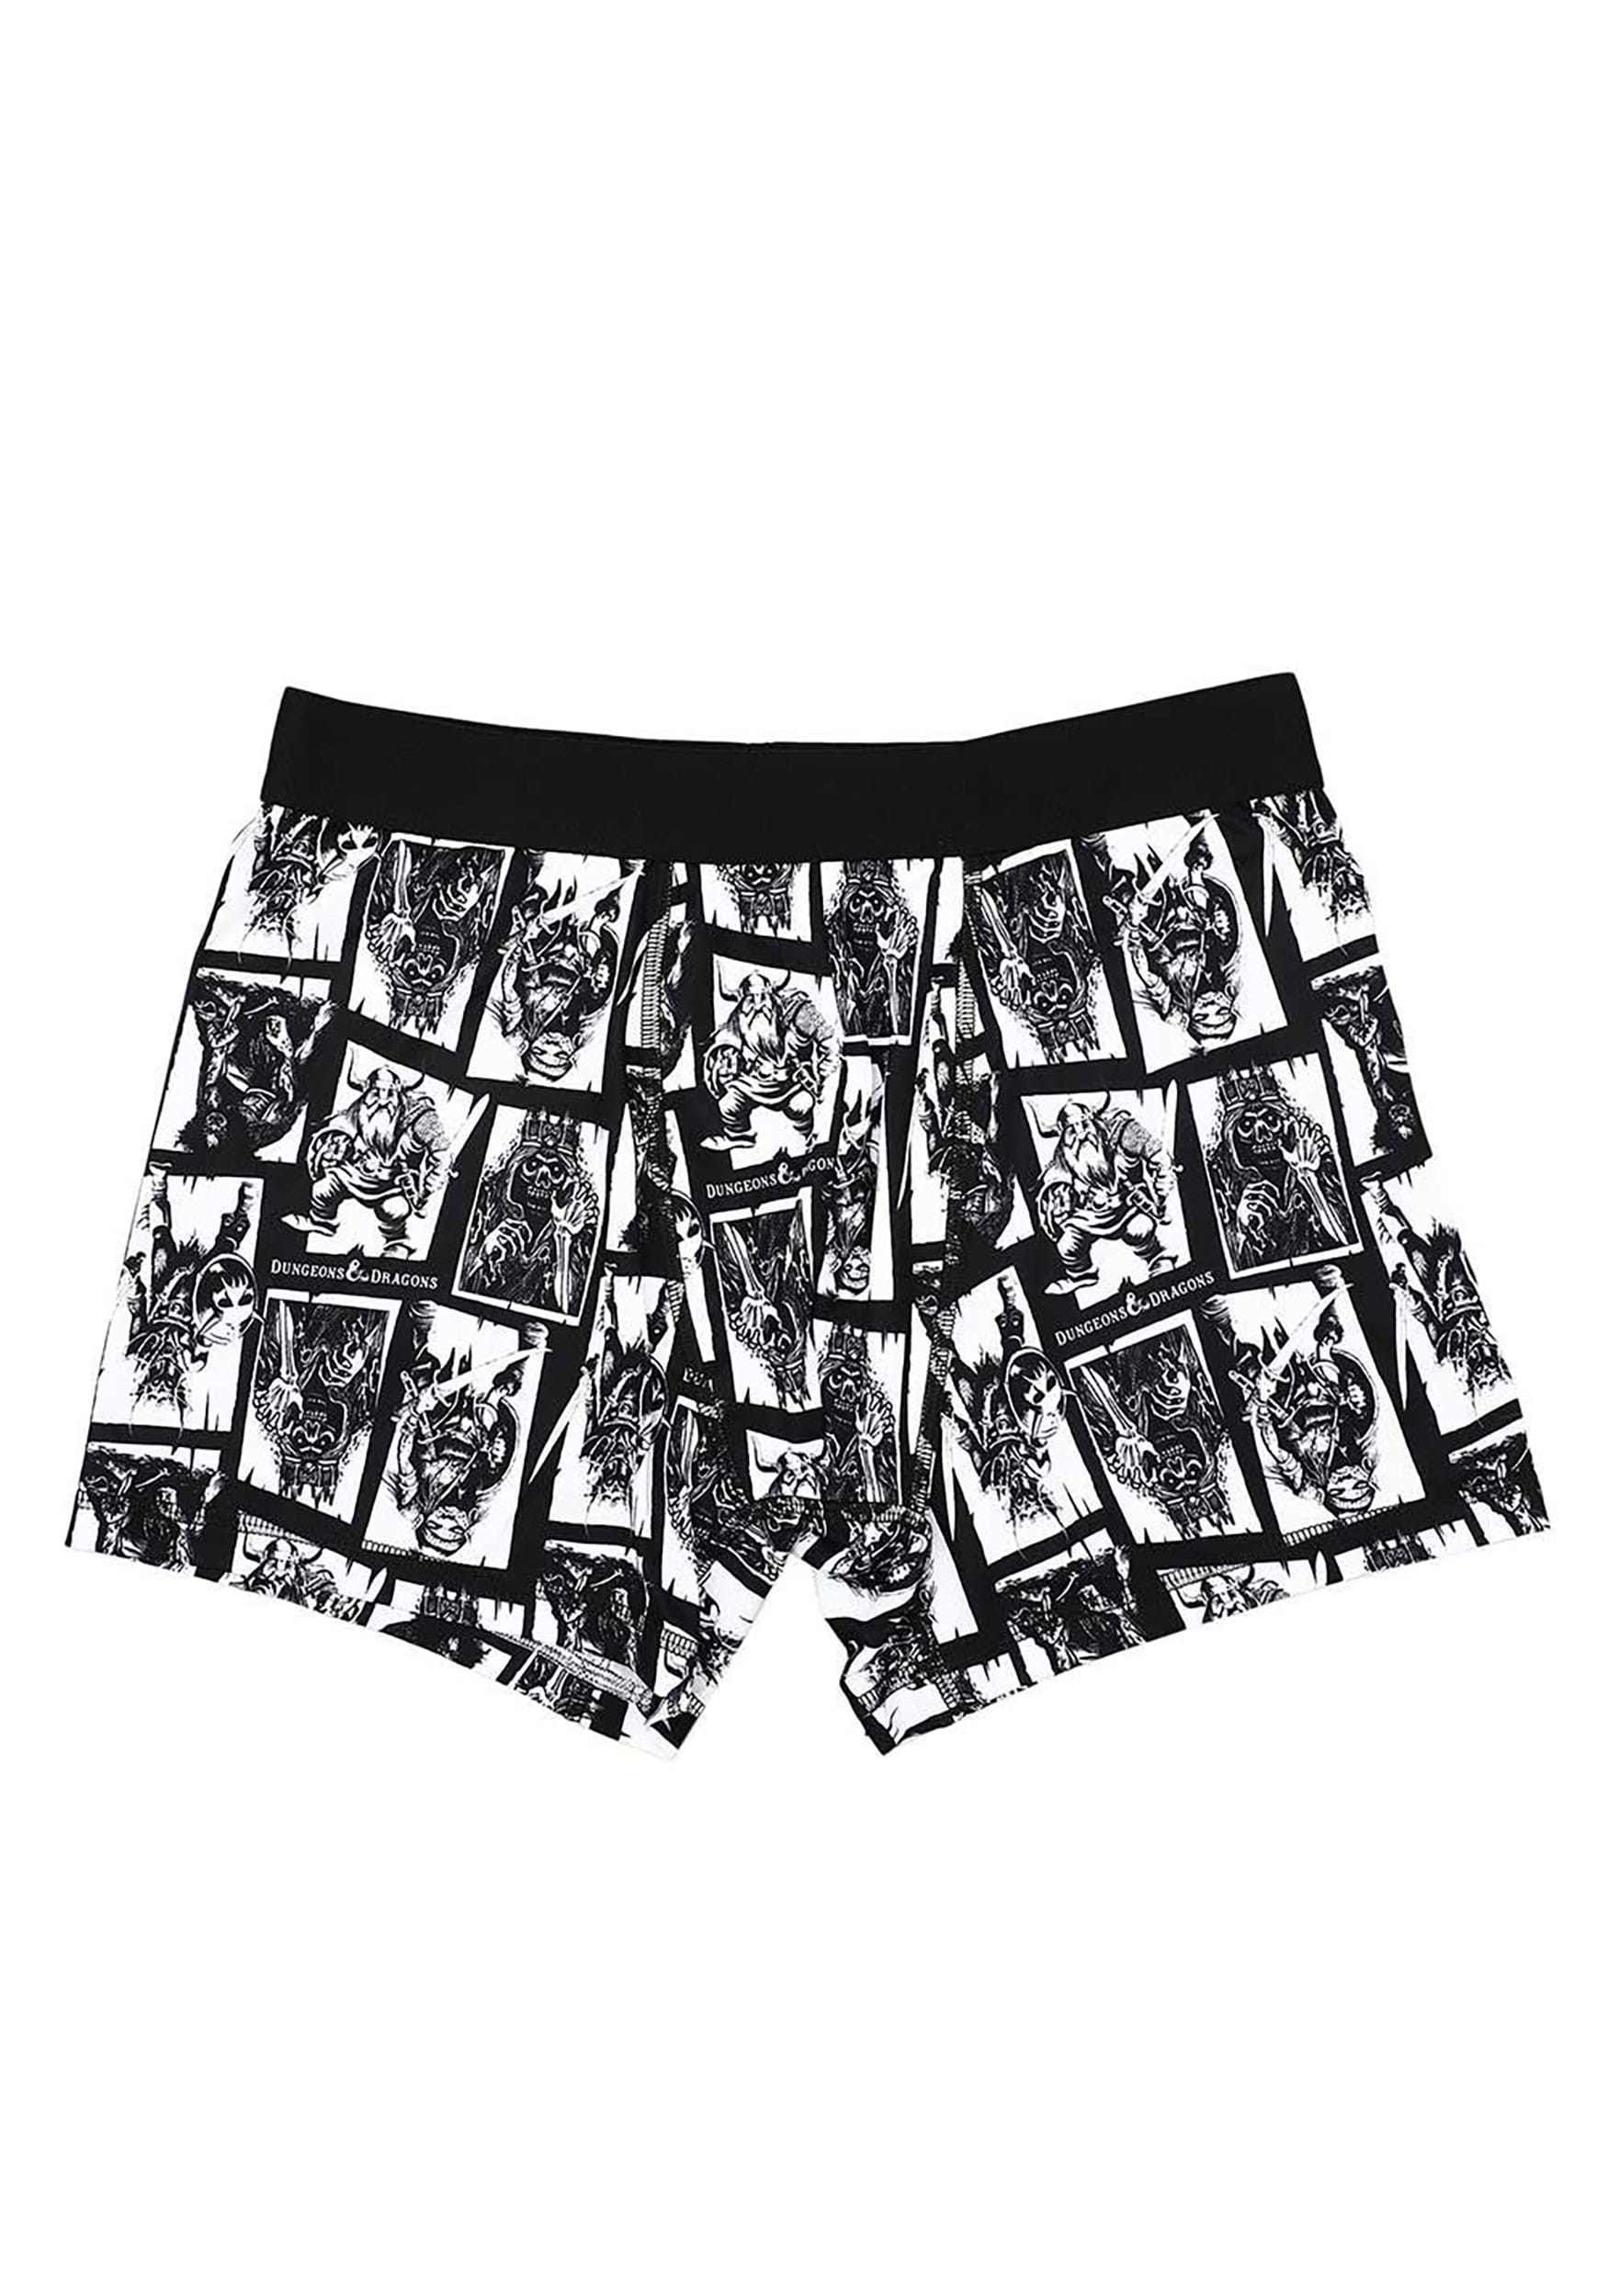 Dungeons & Dragons 3 Pack Adult Boxer Briefs